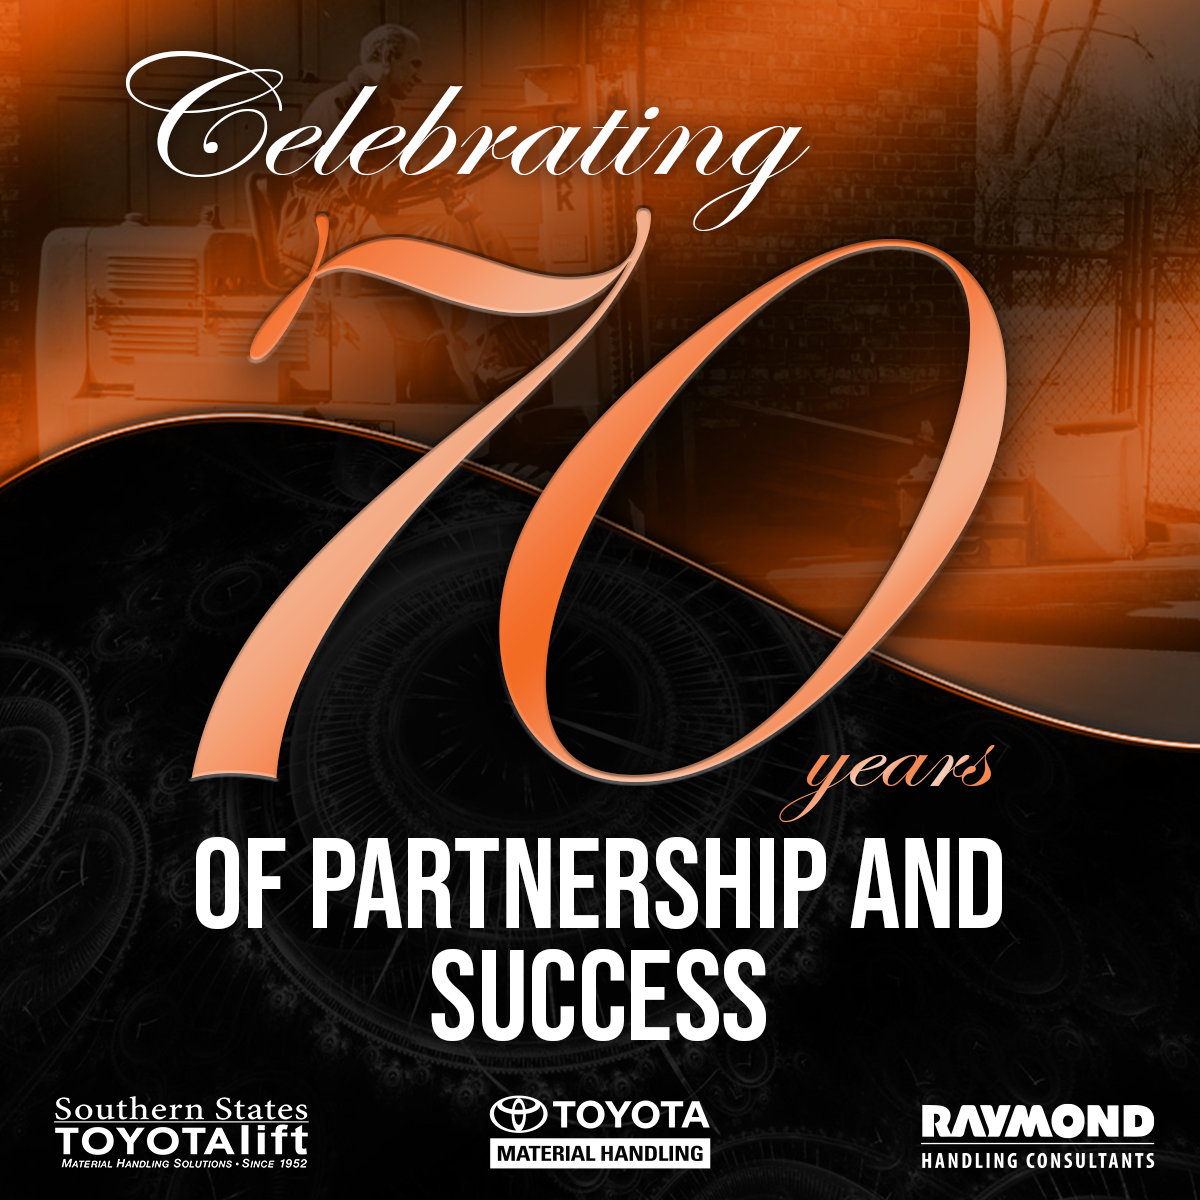 Southern States Toyotalift Celebrating 70 Years